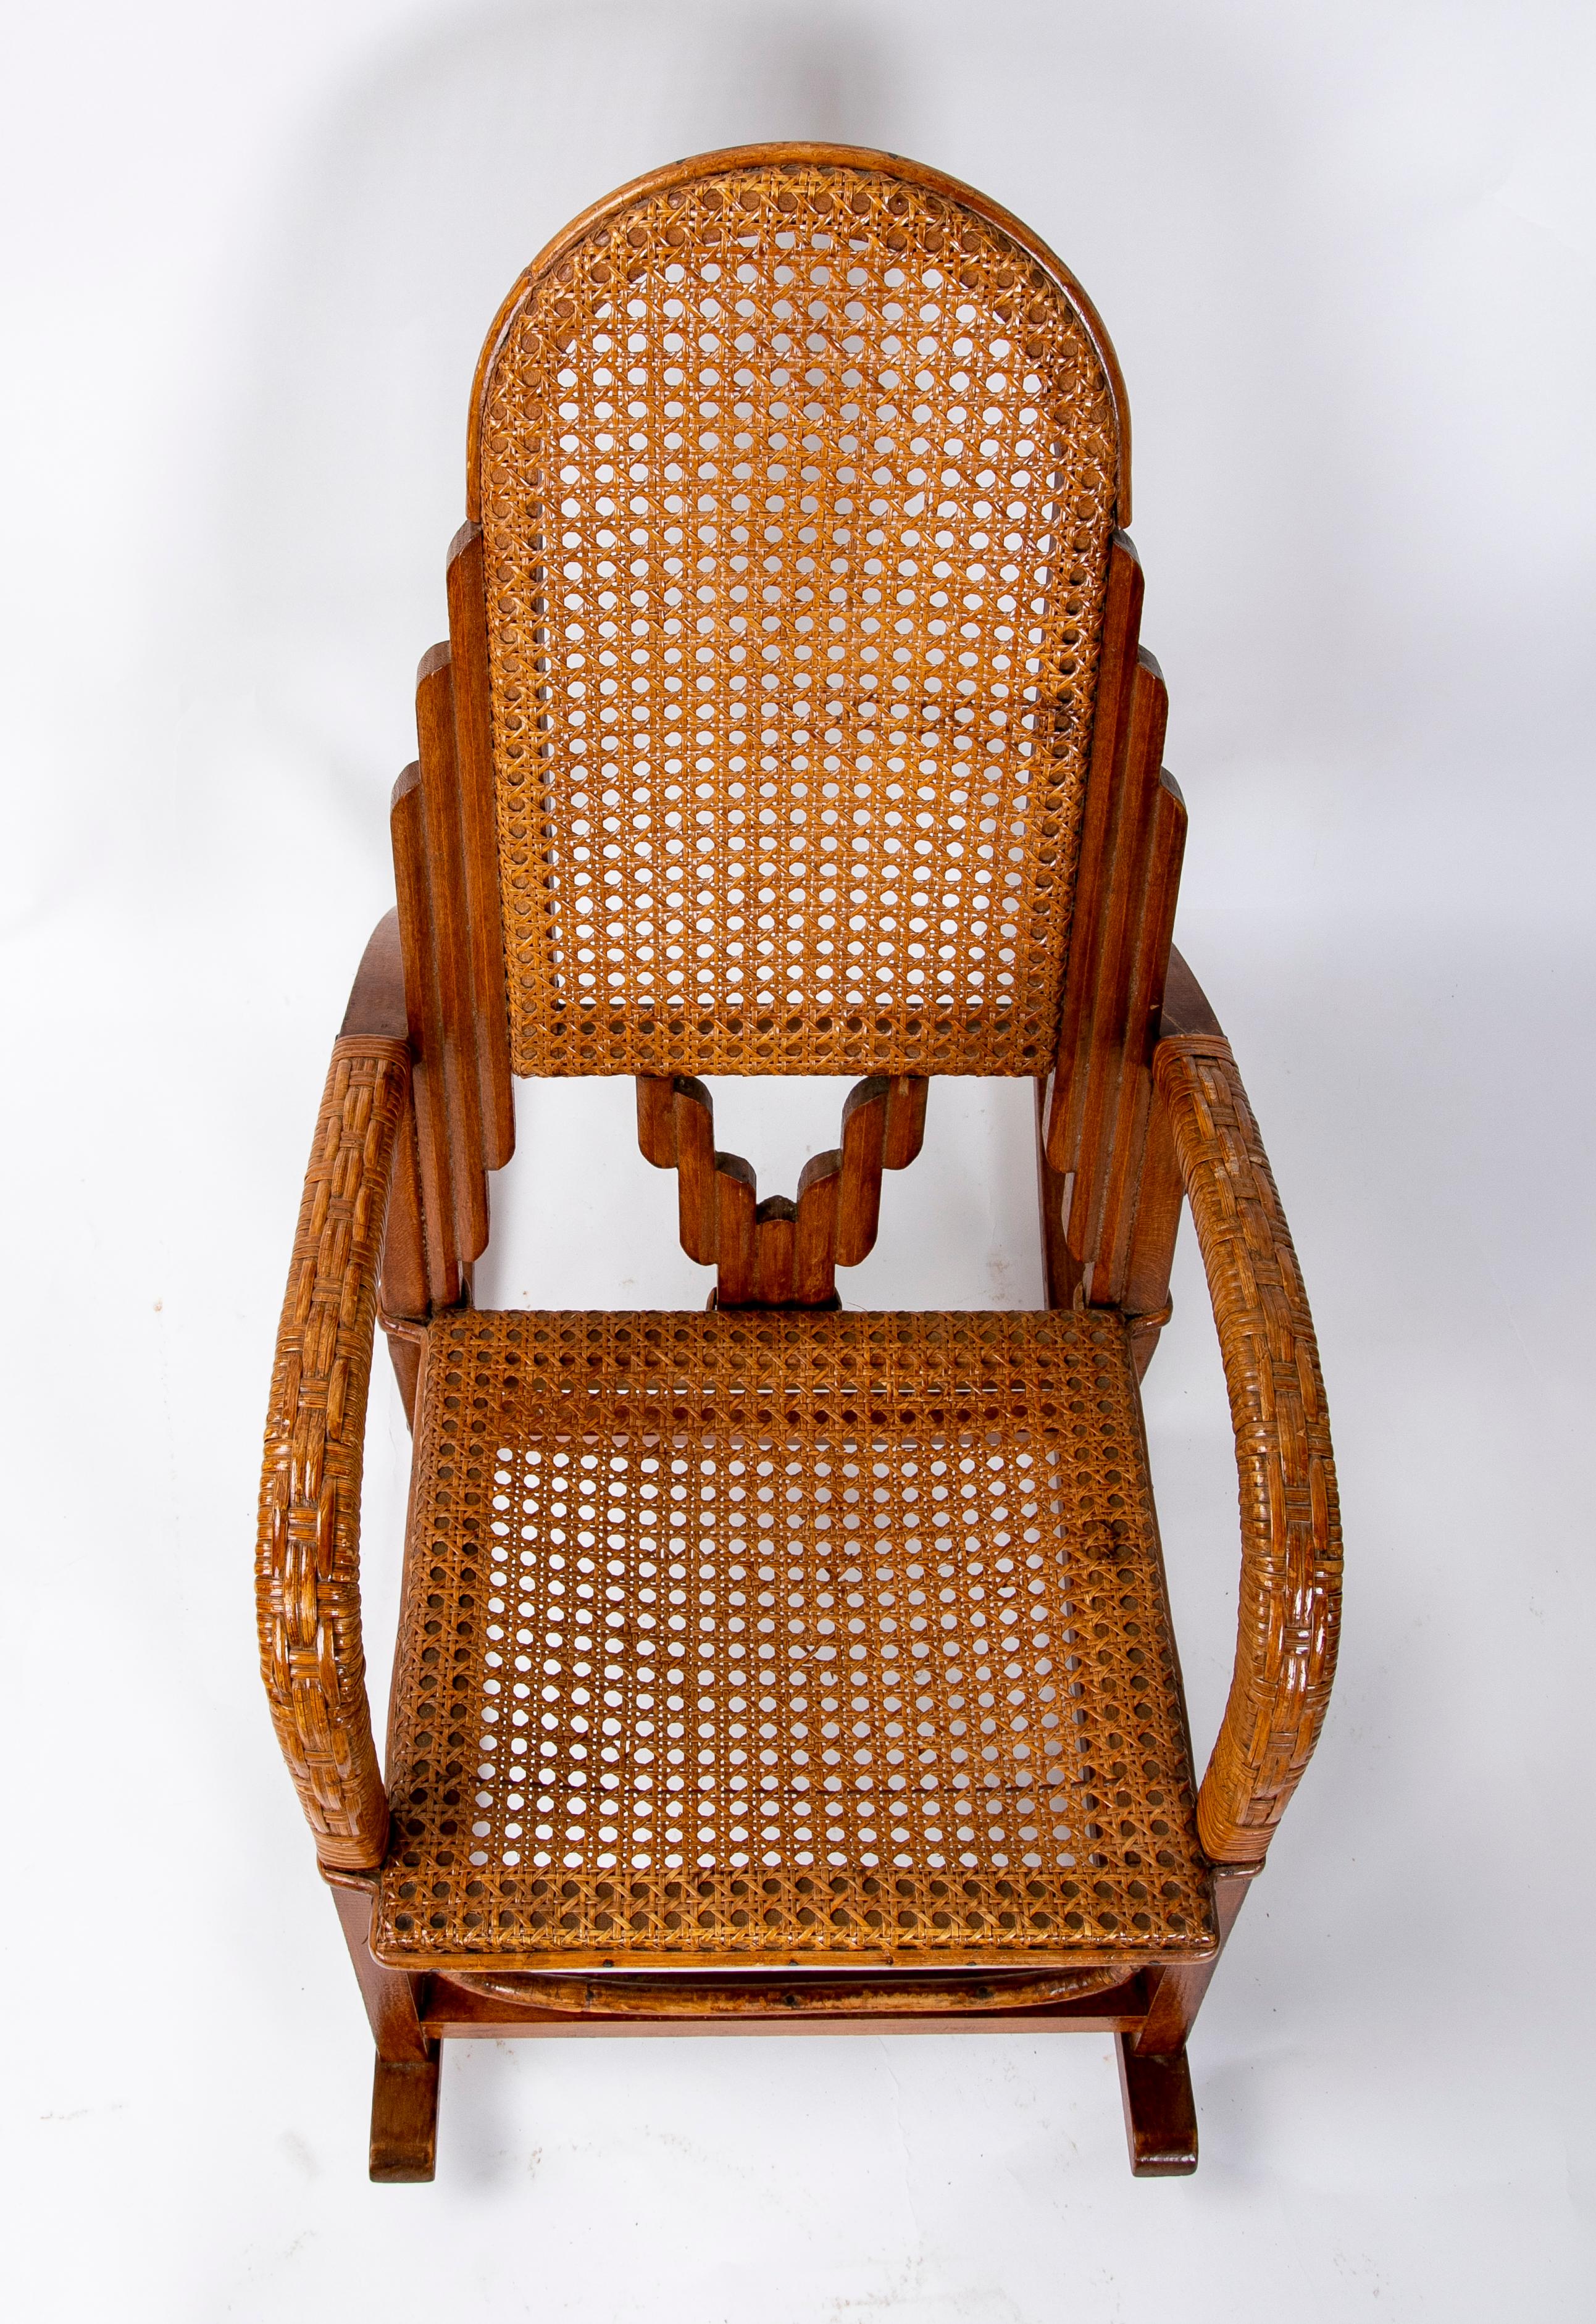 1980s Bamboo, Wood and Wicker Children's Rocking Chair For Sale 1